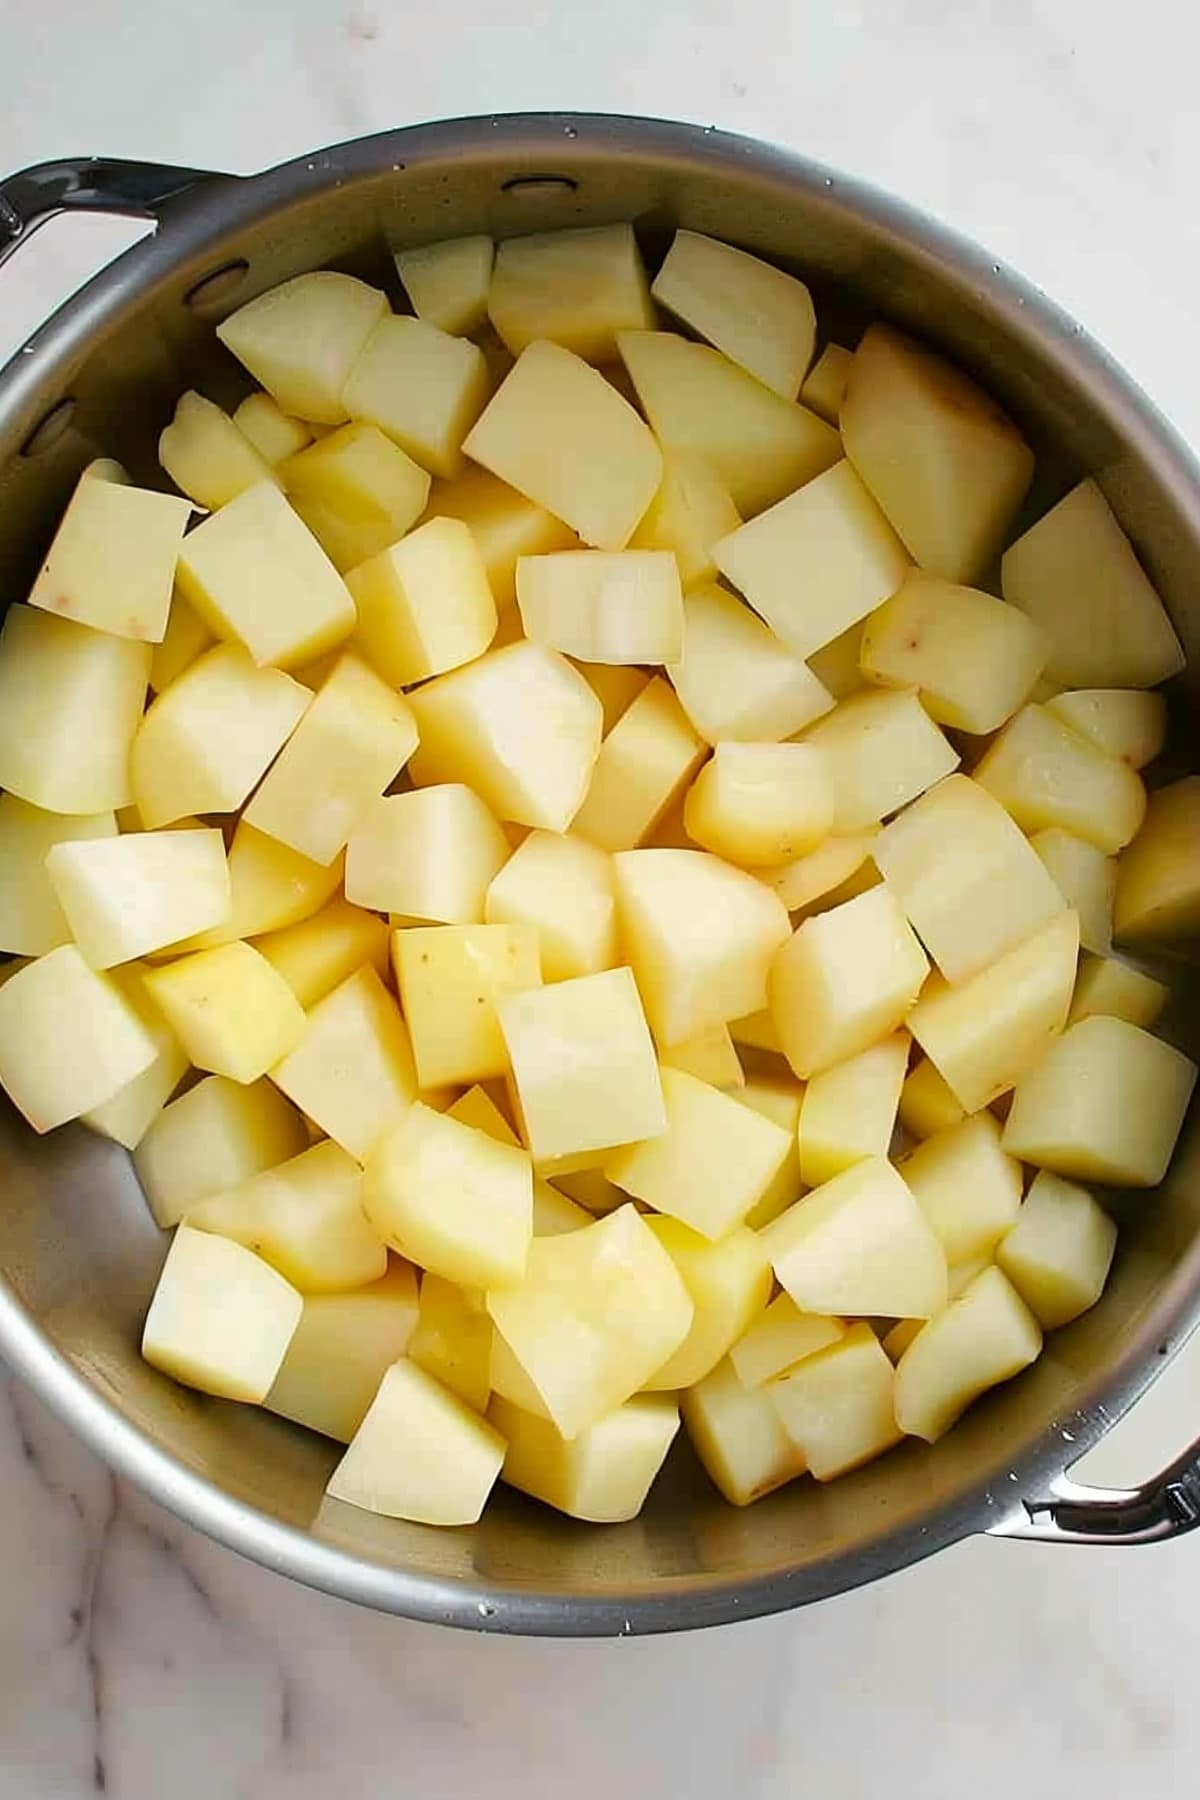 A pan filled with cubed potatoes on a marble counter